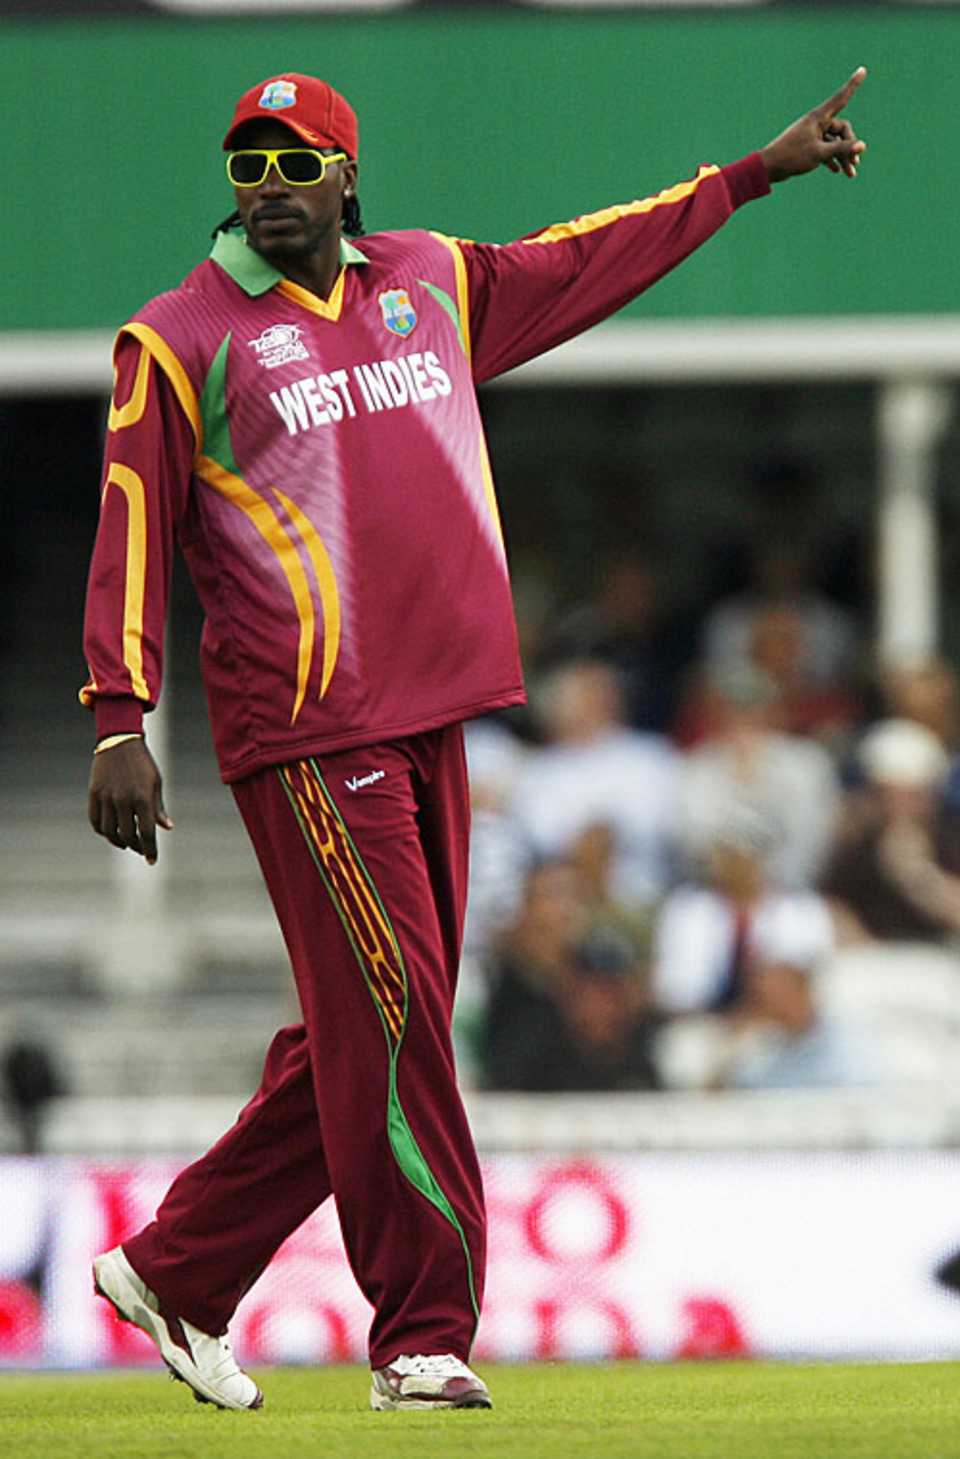 Not much went right for West Indies and Chris Gayle while fielding